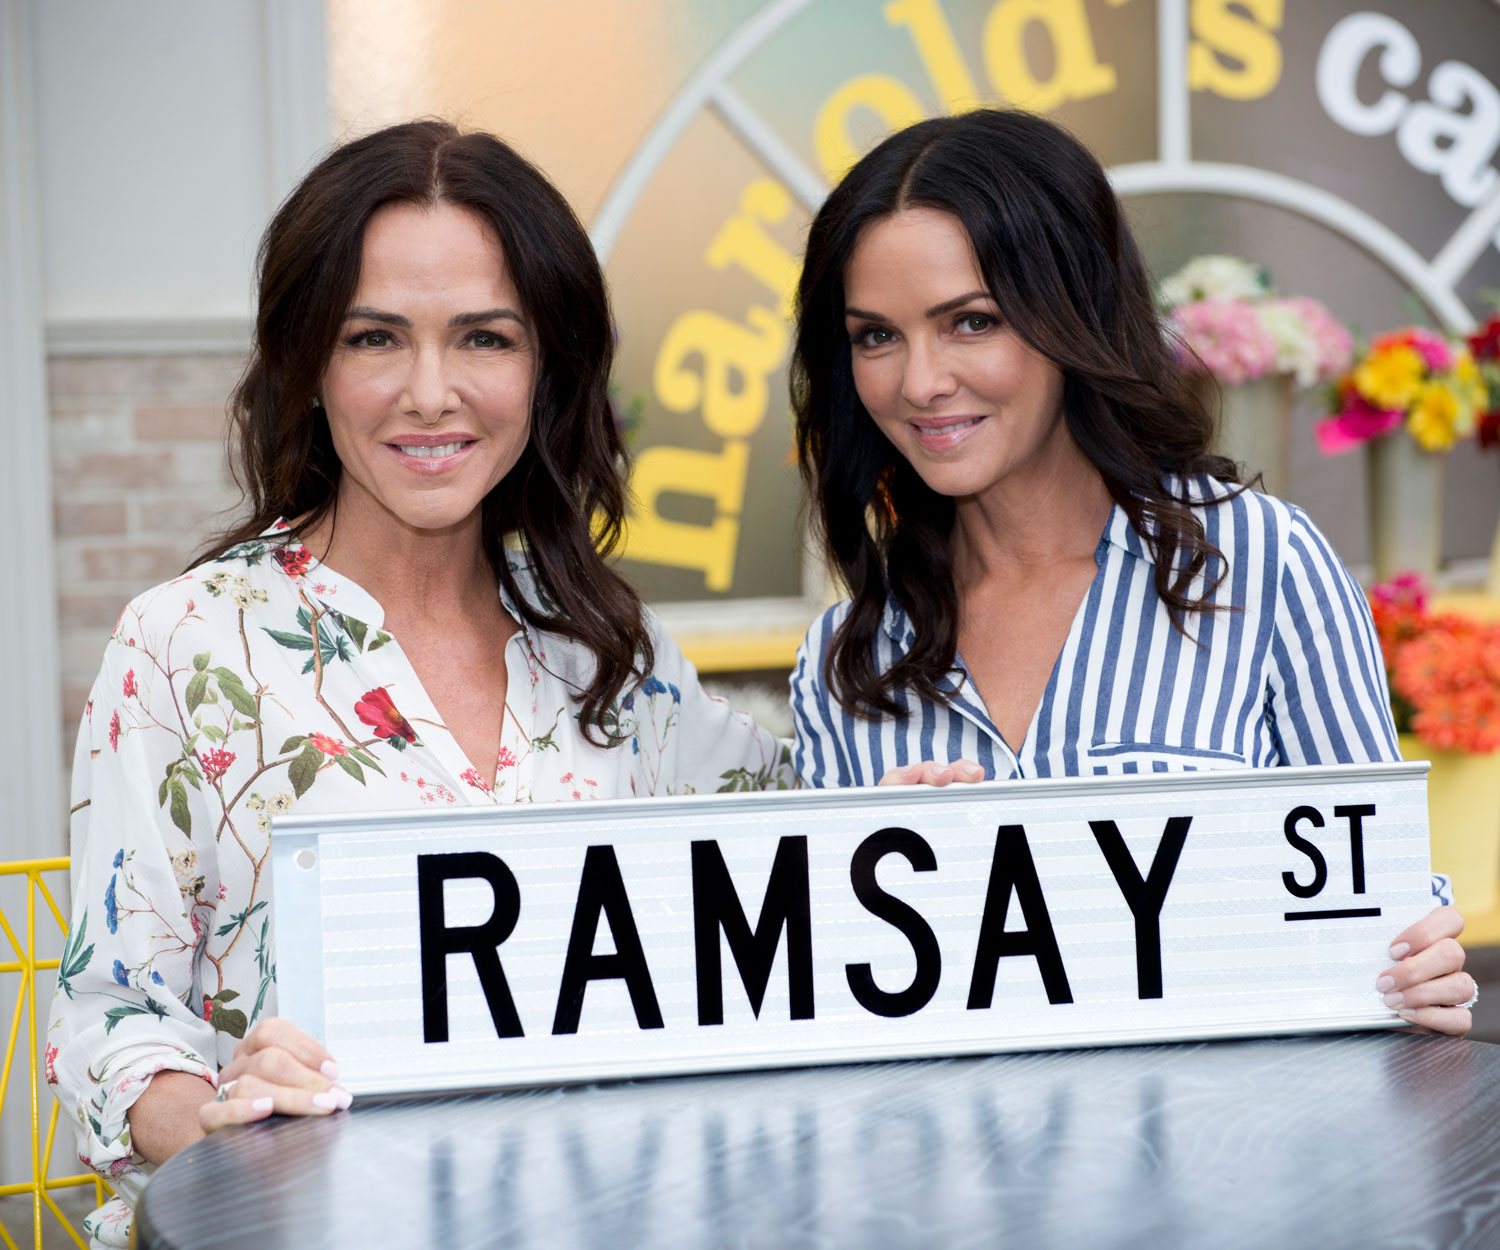 They’re back! The infamous Blakeney Twins return to Neighbours